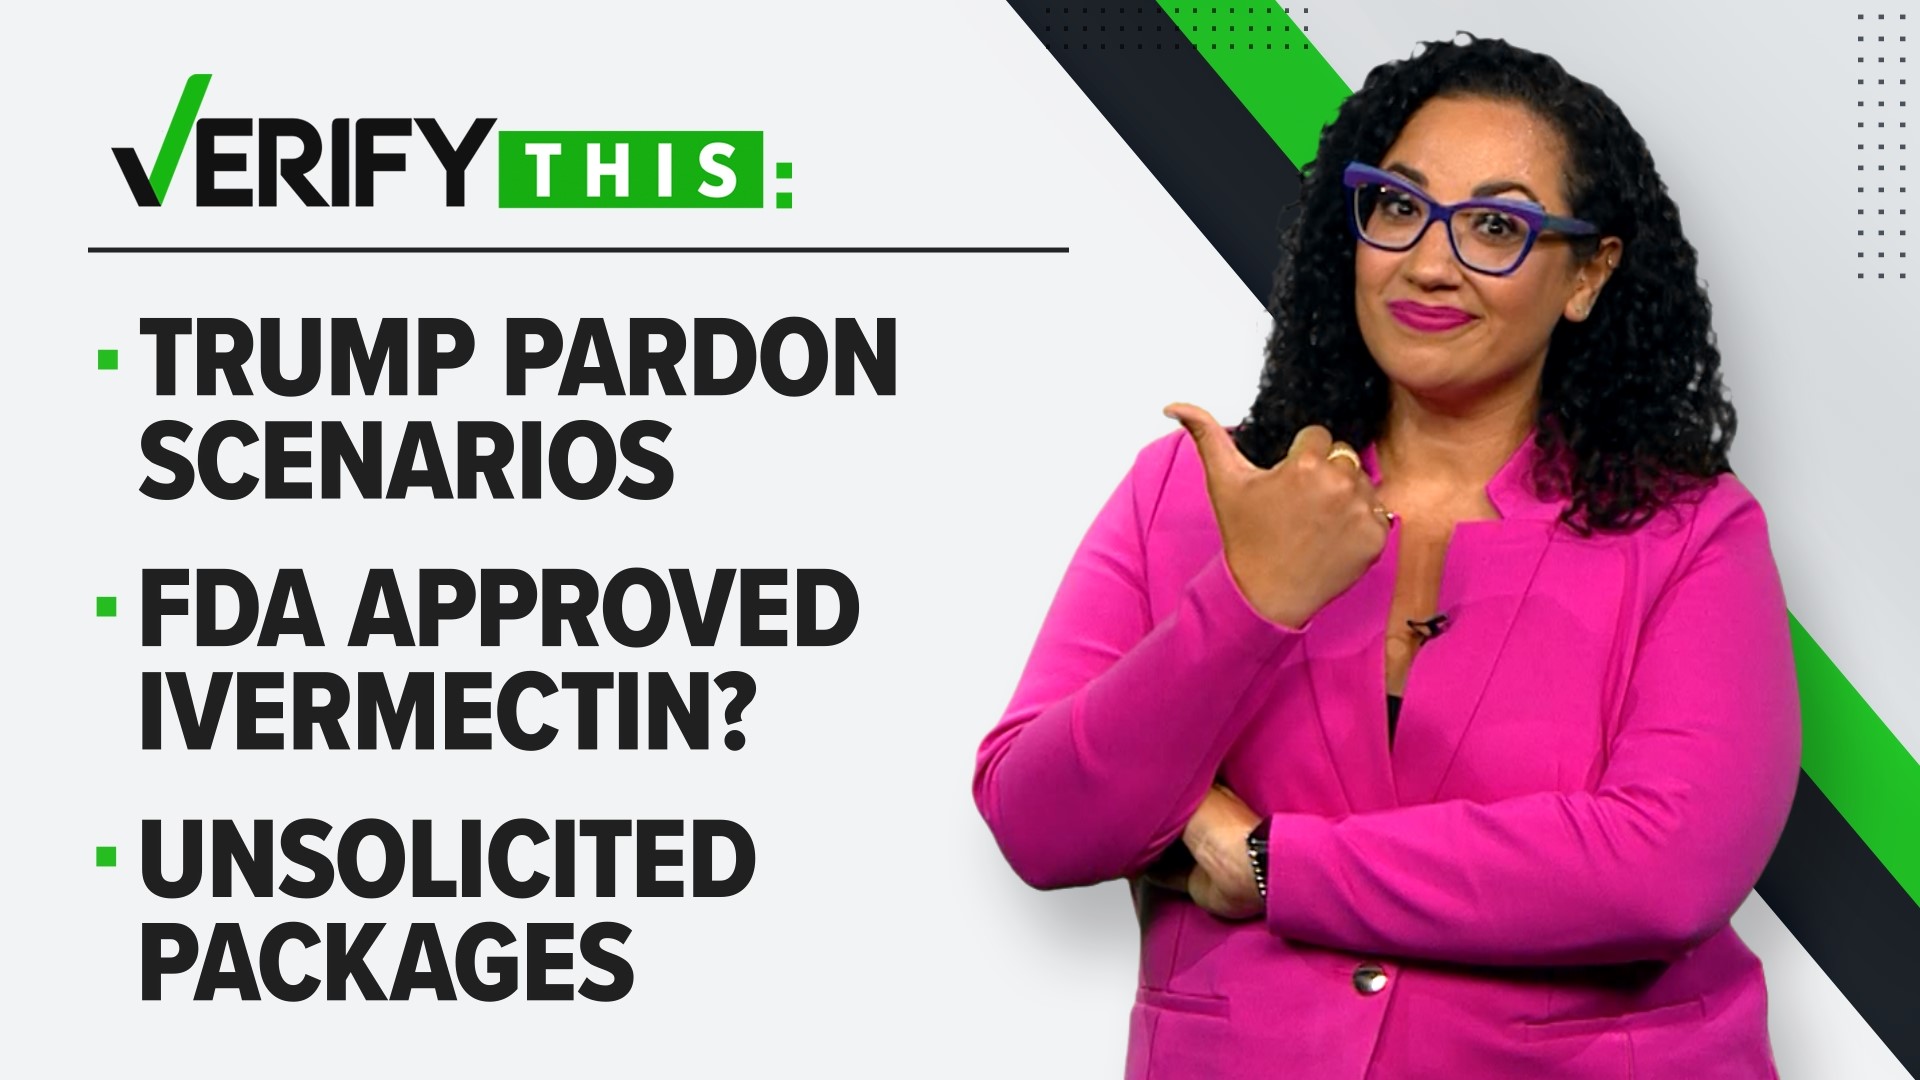 In this week's episode we look at Trump pardon scenarios, if it's legal to keep packages you get that you didn't order and an update on Parent Plus Loan forgiveness